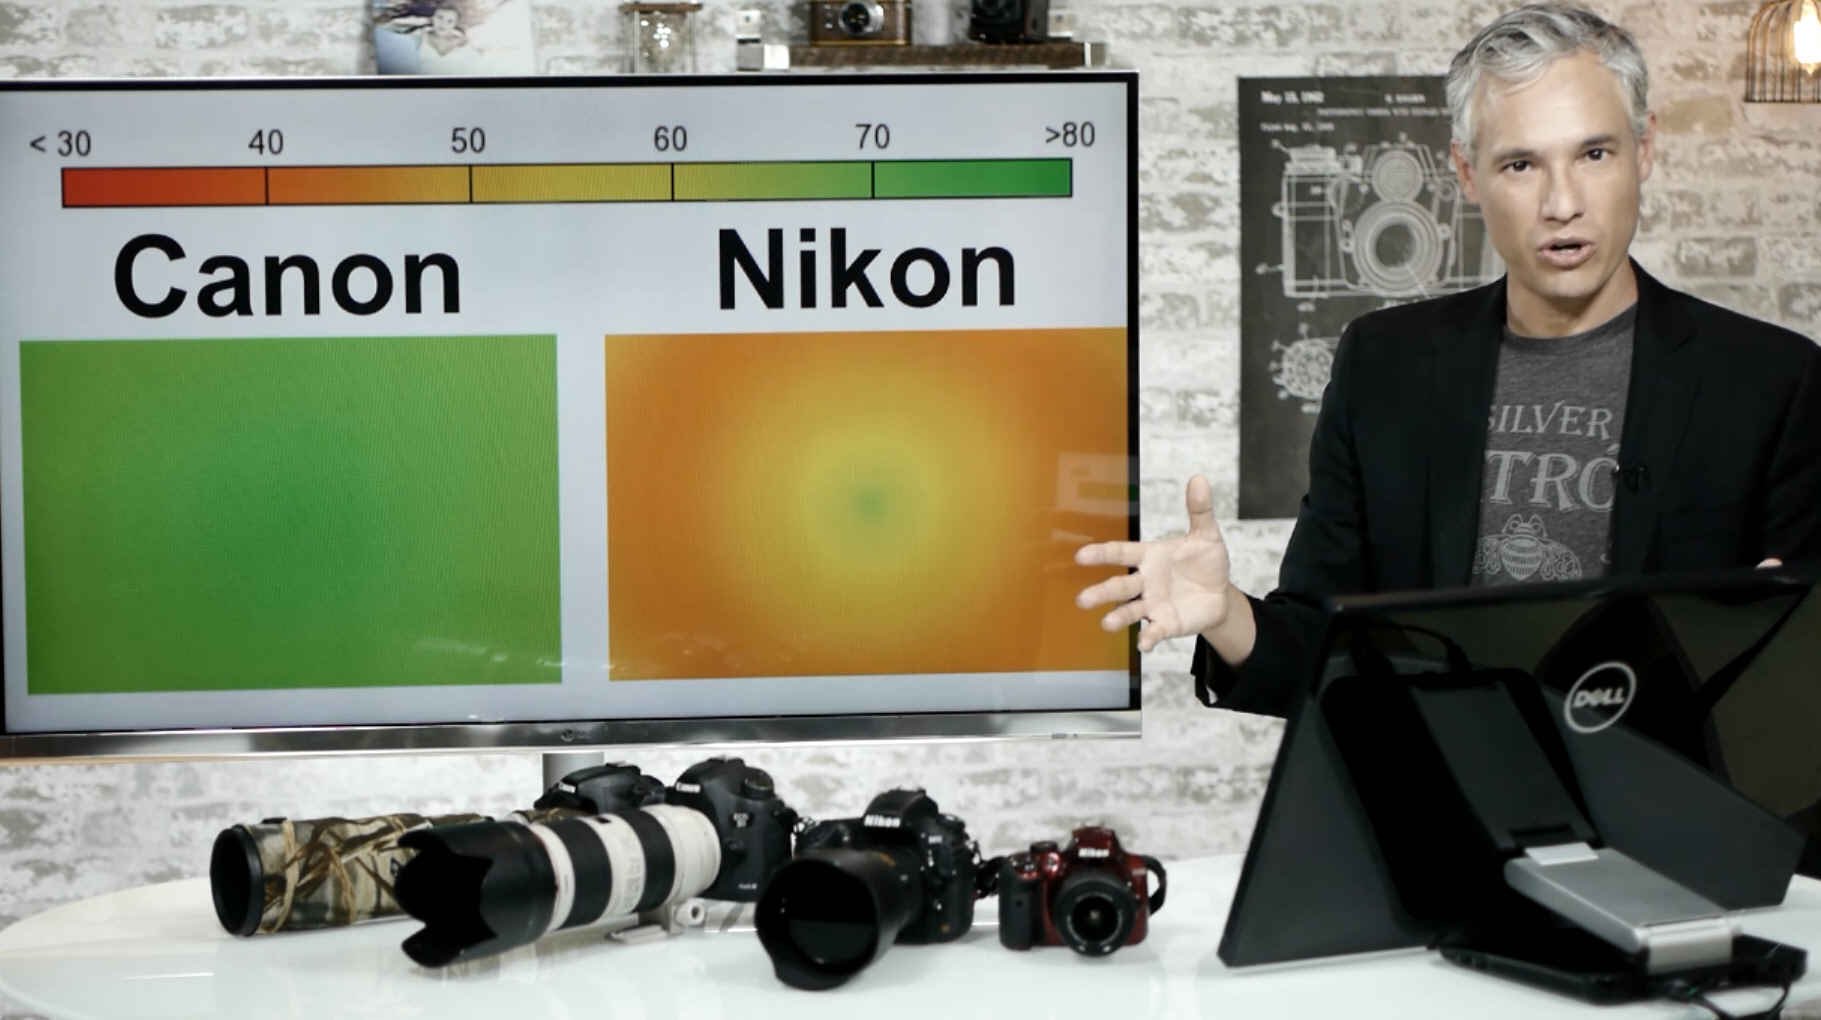 Canon vs. Nikon: Why I want to switch to Nikon, but can’t fully